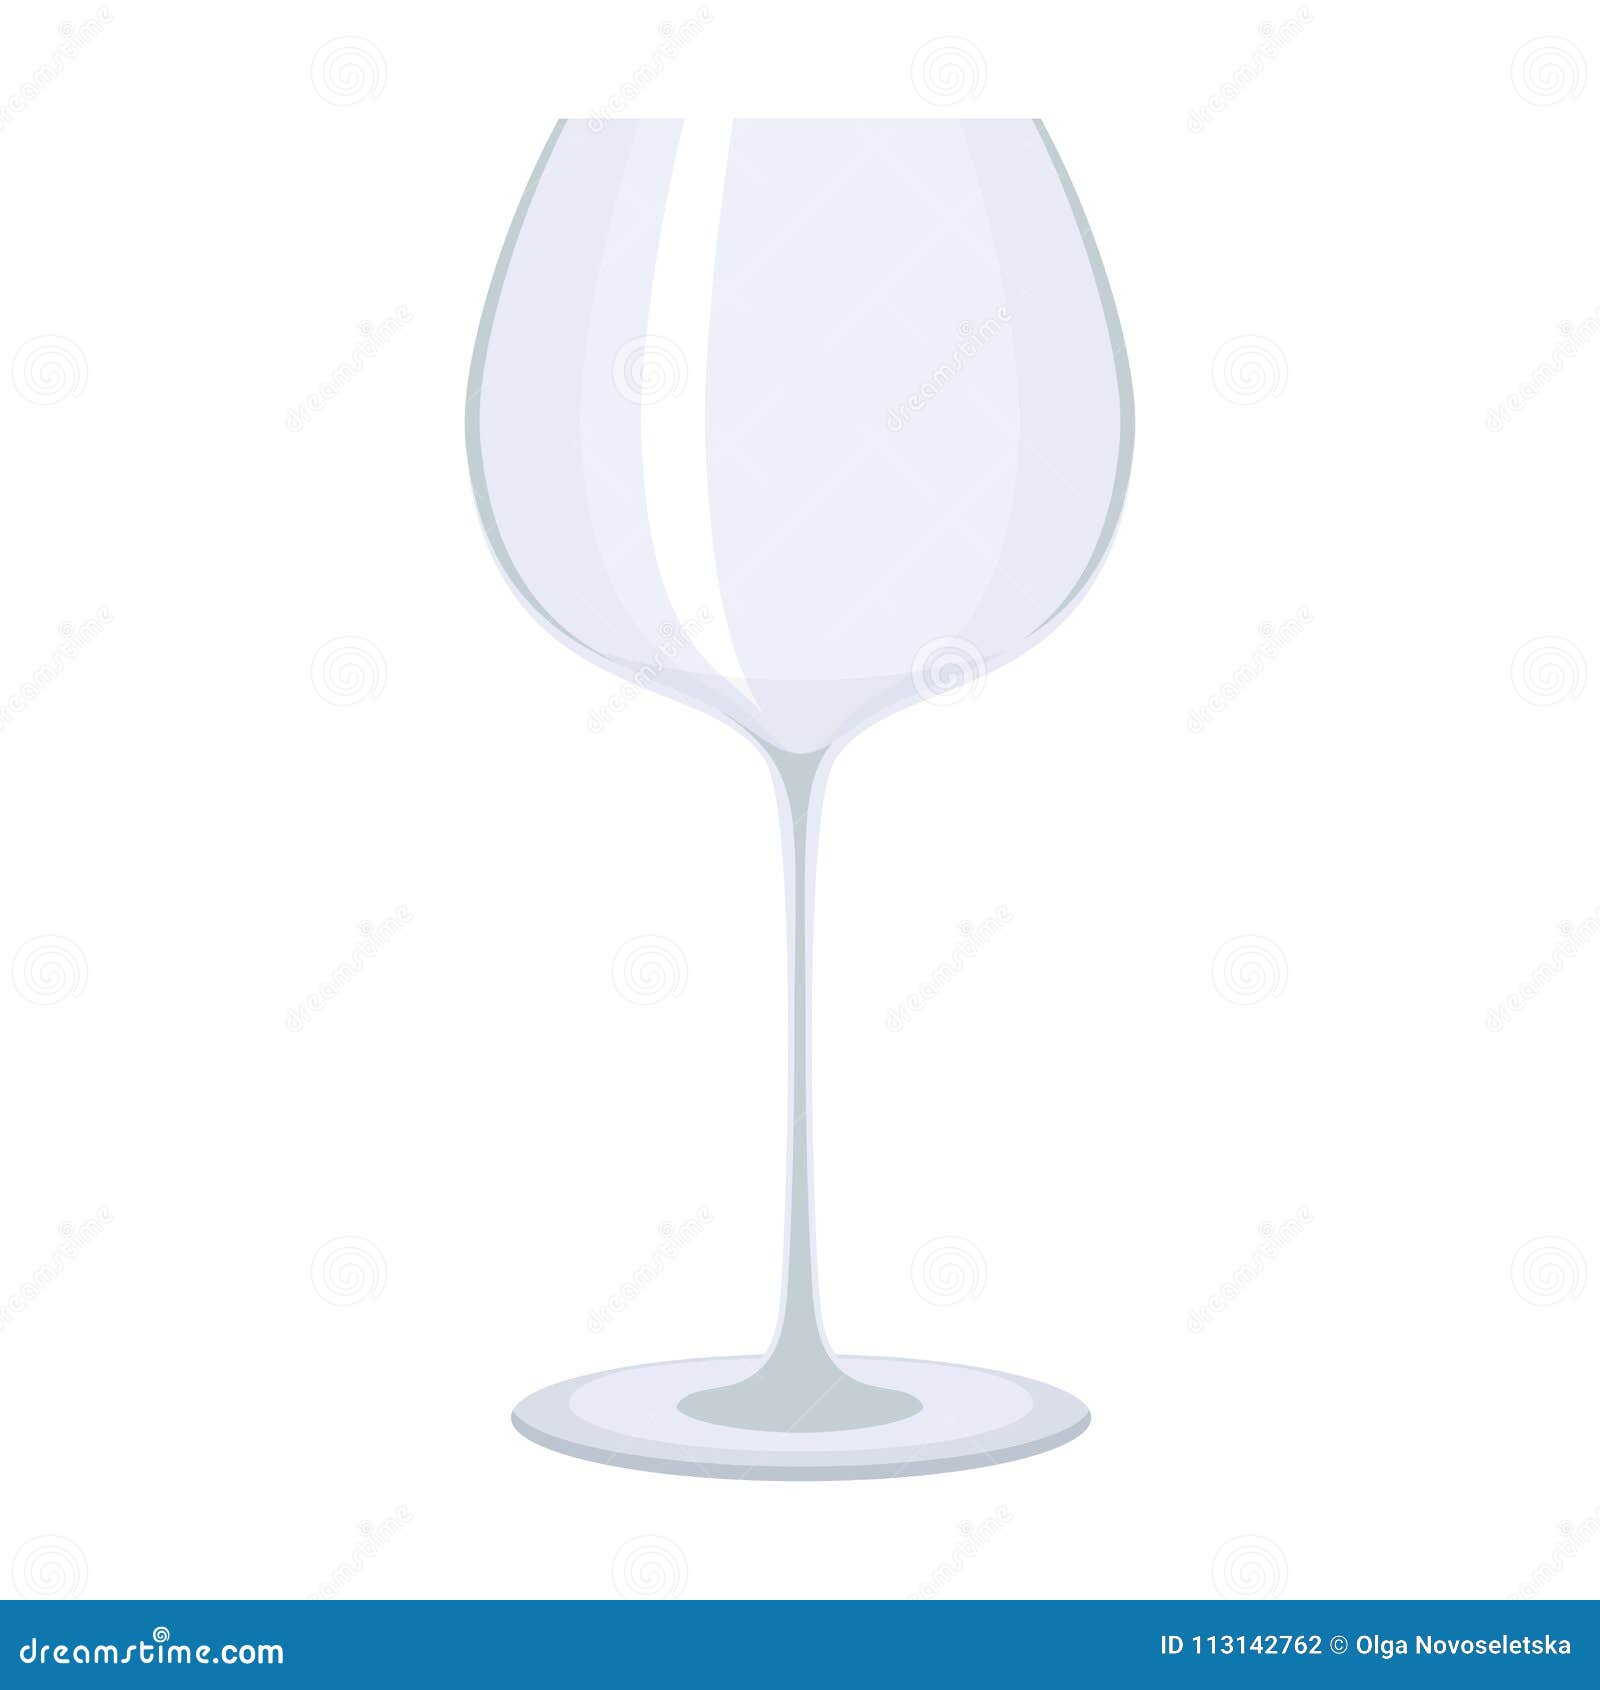 https://thumbs.dreamstime.com/z/wine-glass-icon-empty-transparent-glass-wine-flat-vector-cartoon-illustration-objects-isolated-white-background-113142762.jpg